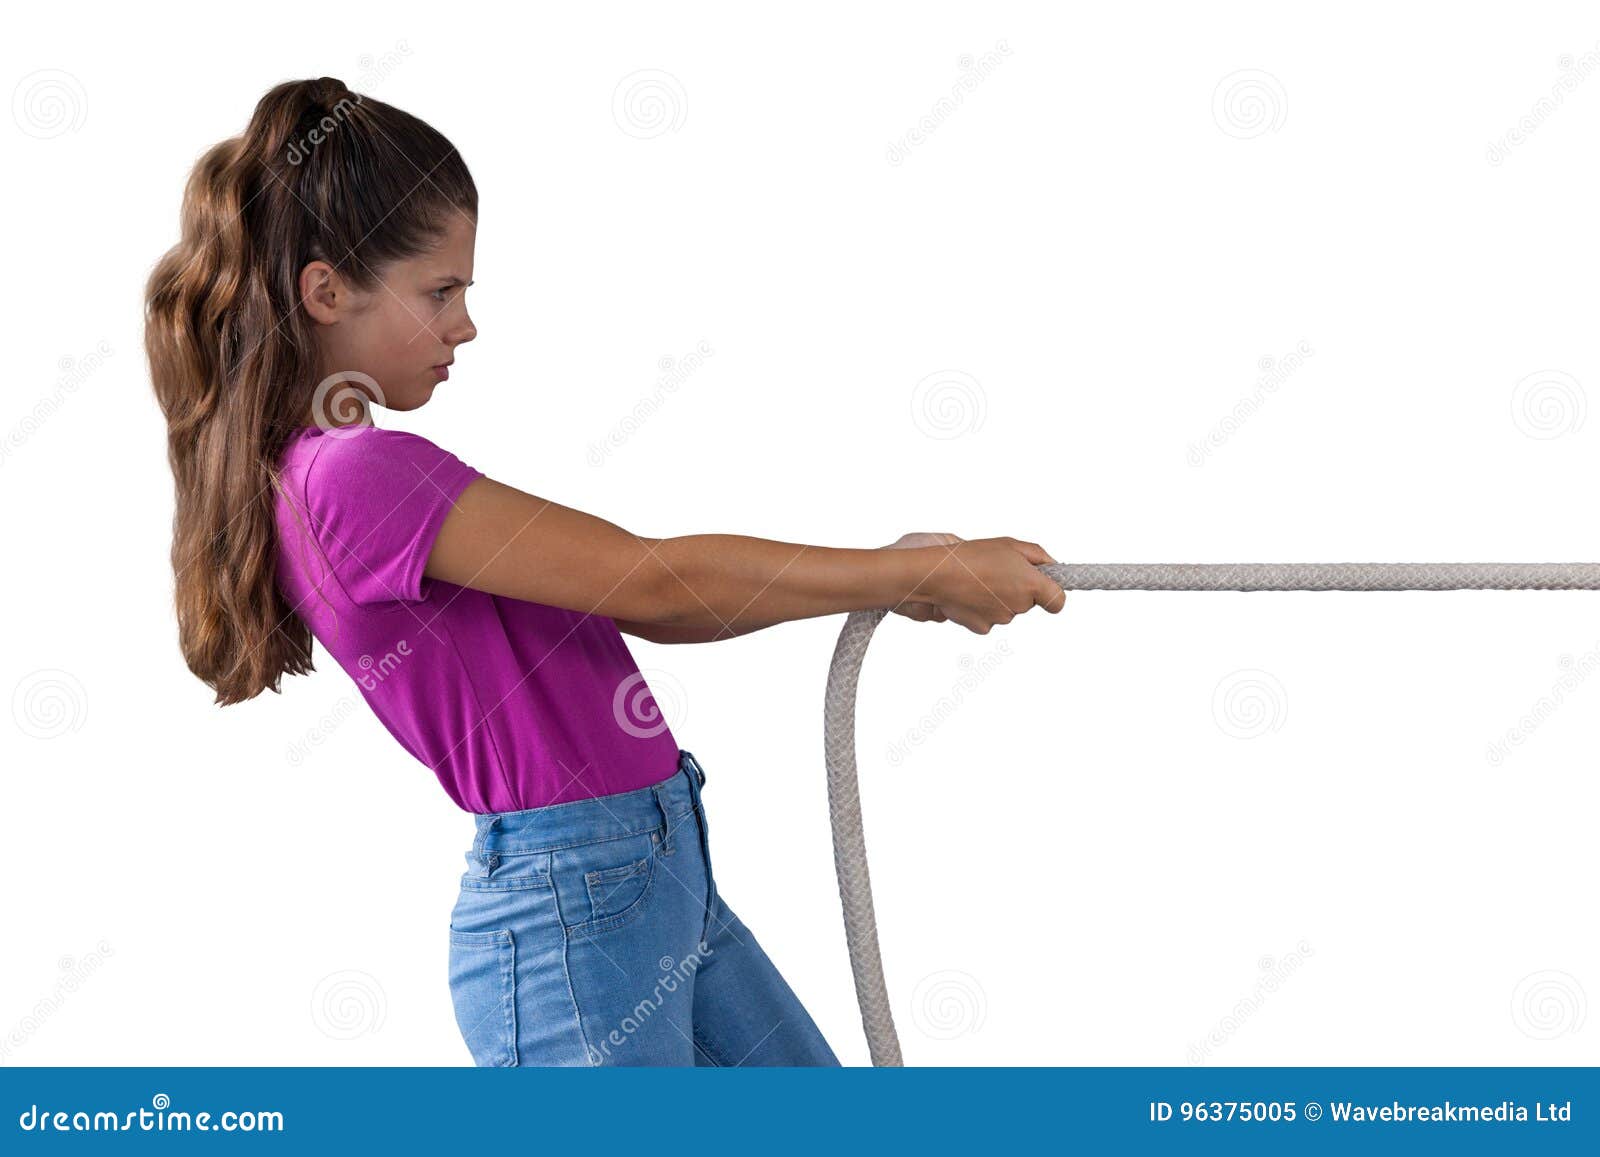 Girl pulling the rope stock image. Image of effort, competitive - 96375005